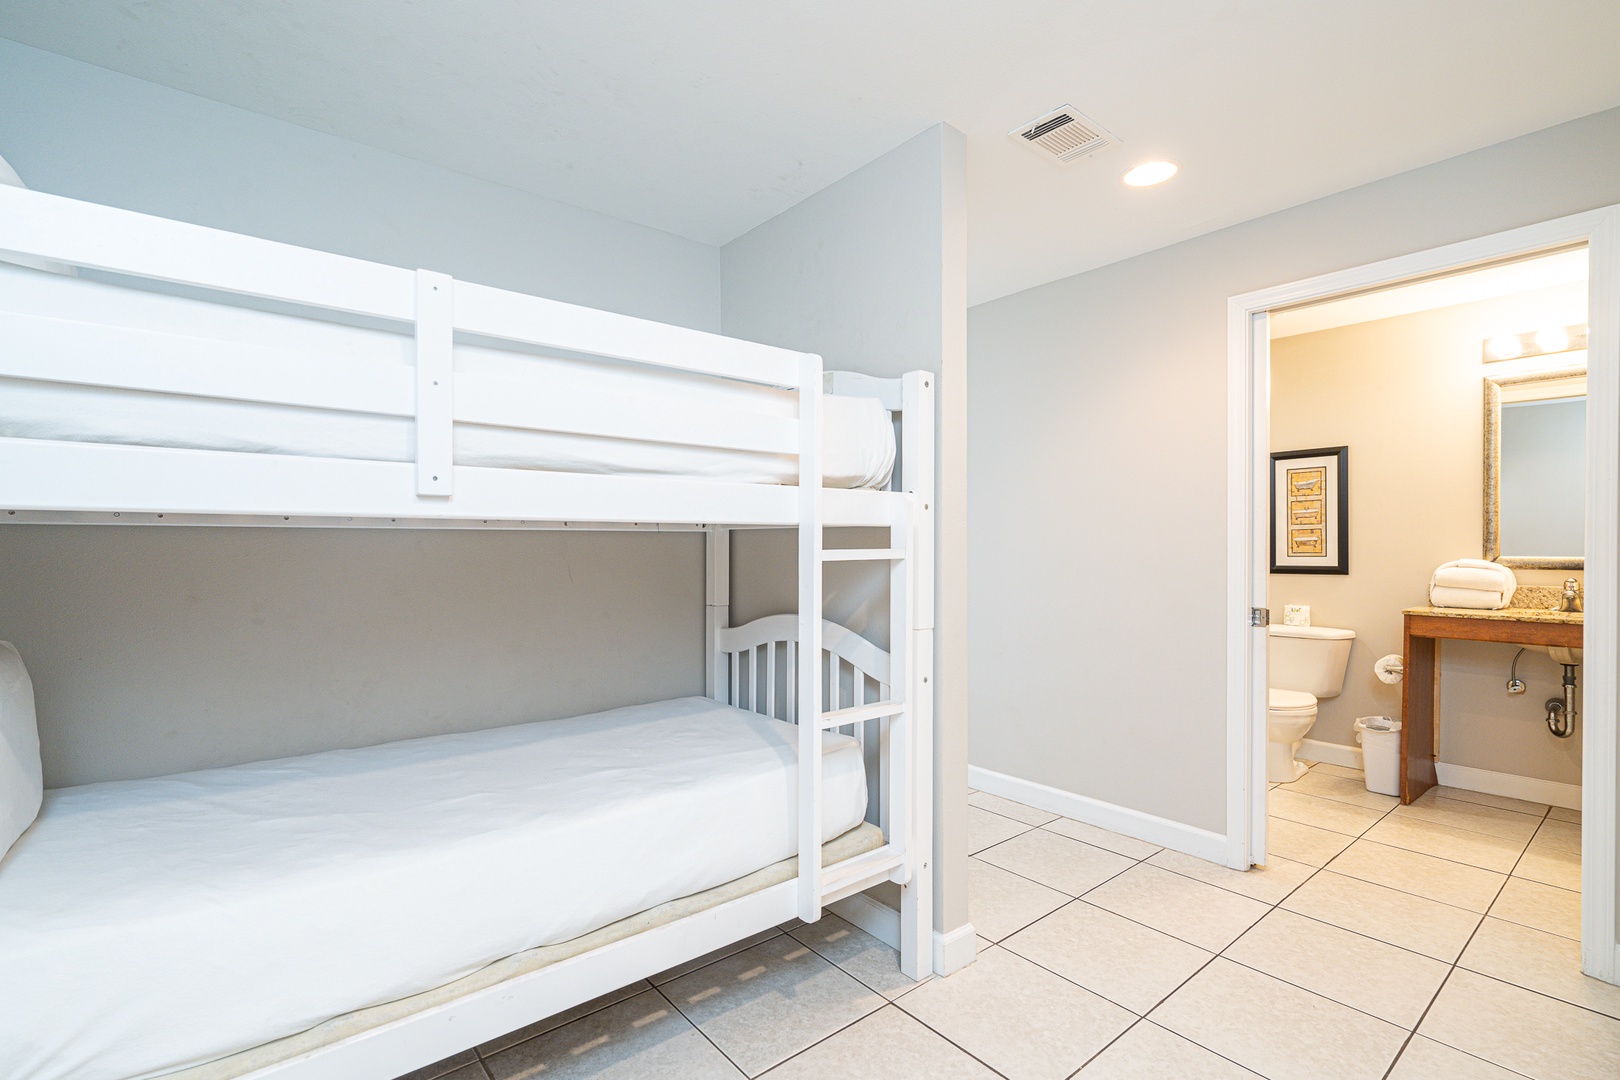 Twin-over-twin bunkbeds await in the cozy alcove